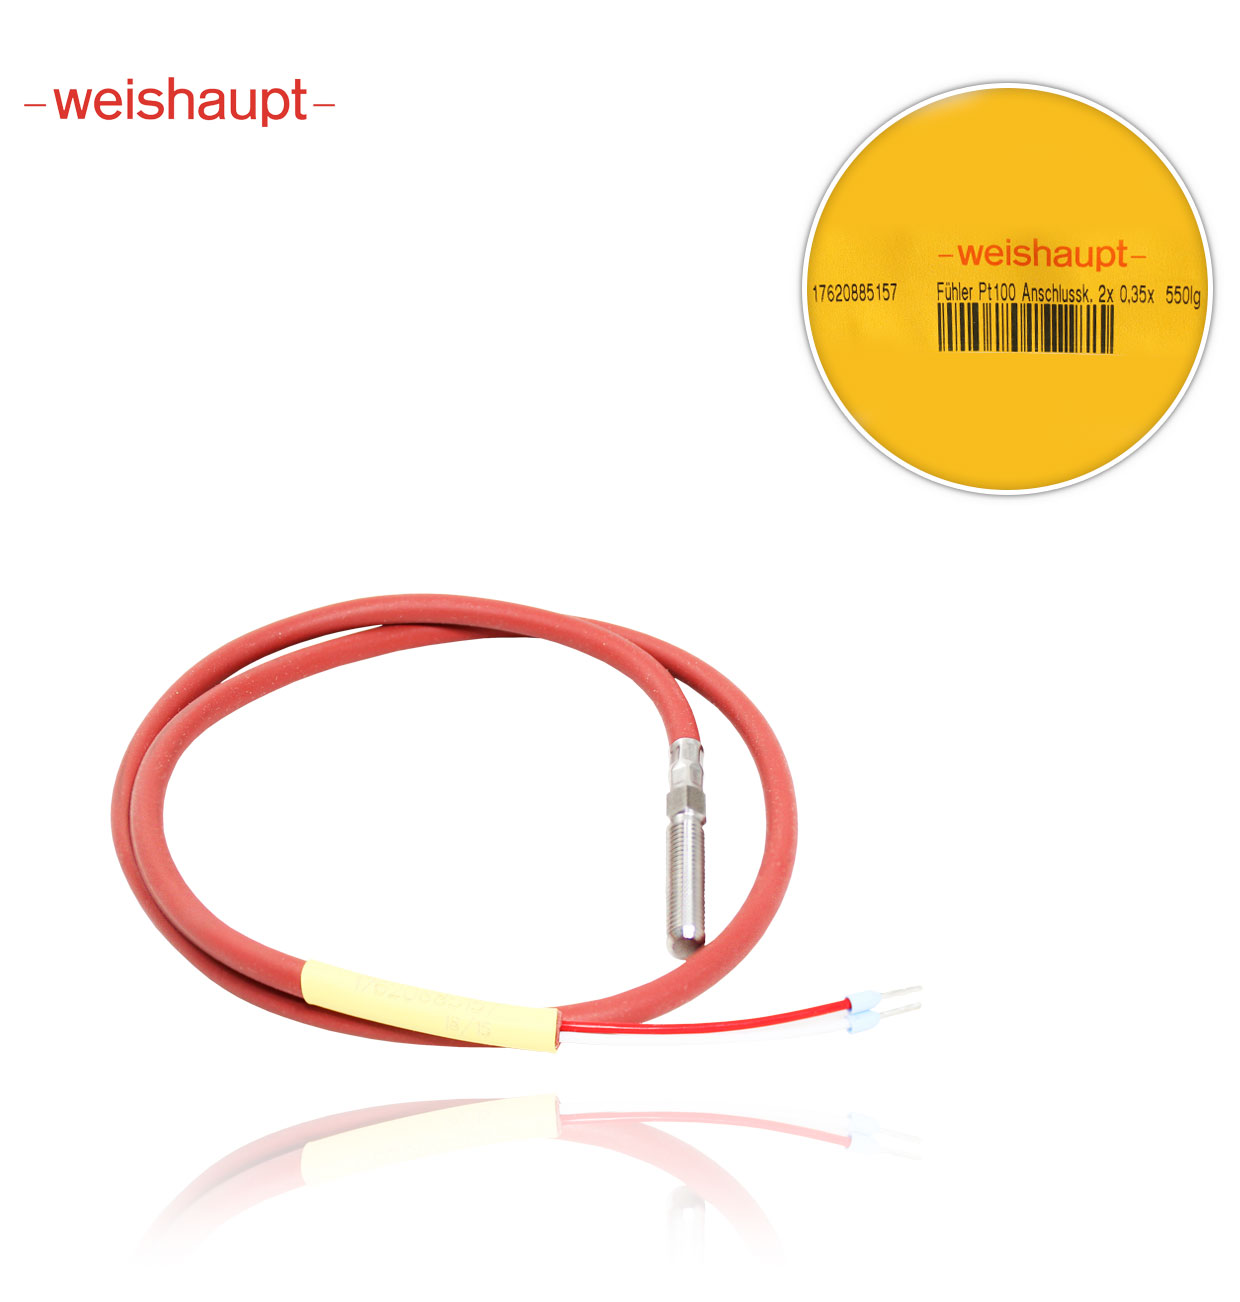 WEISHAUPT 17620885157 PT100  2 x 0.35 x 550  with cable